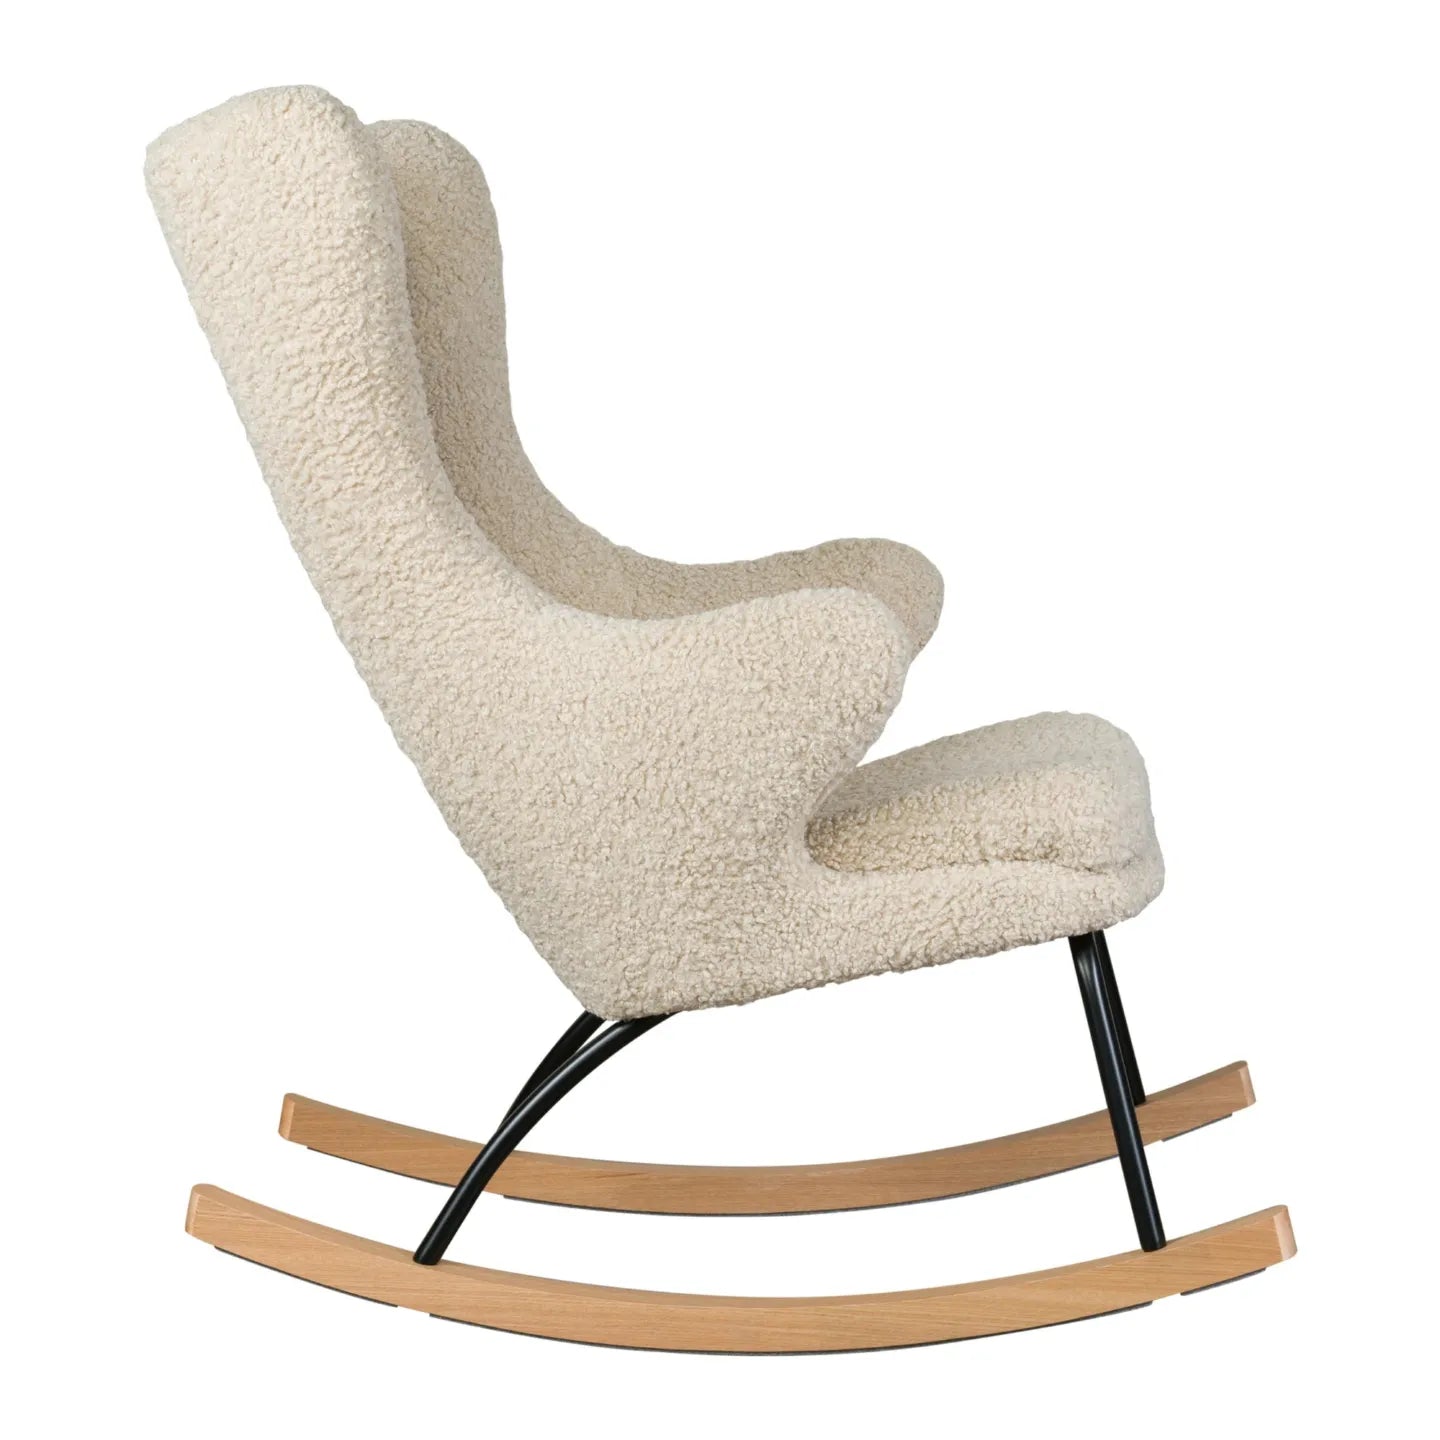 Rocking Chair De Luxe - Adult - Teddy - Sheep